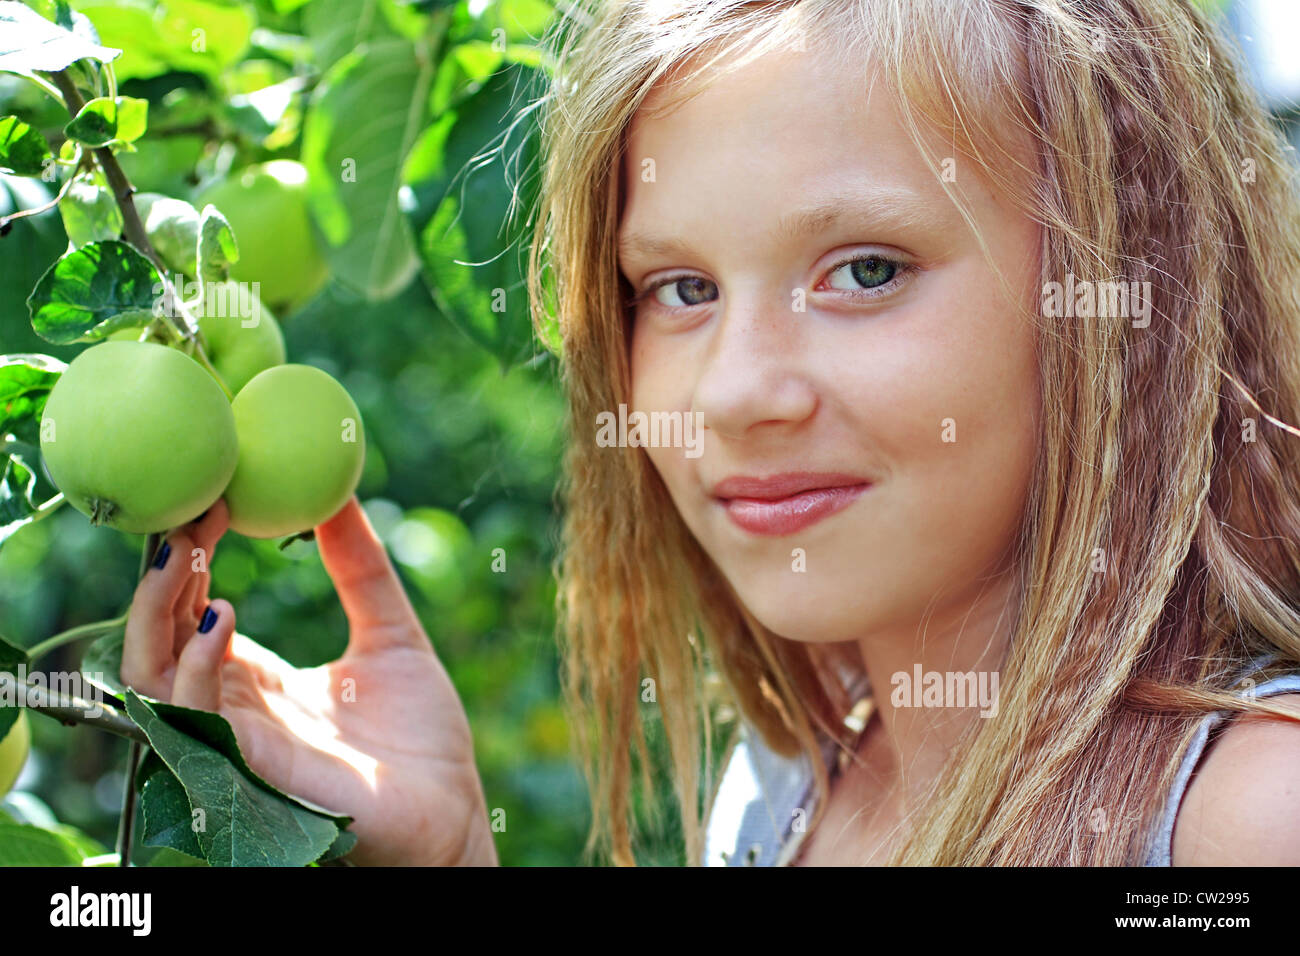 A 12 years old girl with green apples in the garden Stock Photo